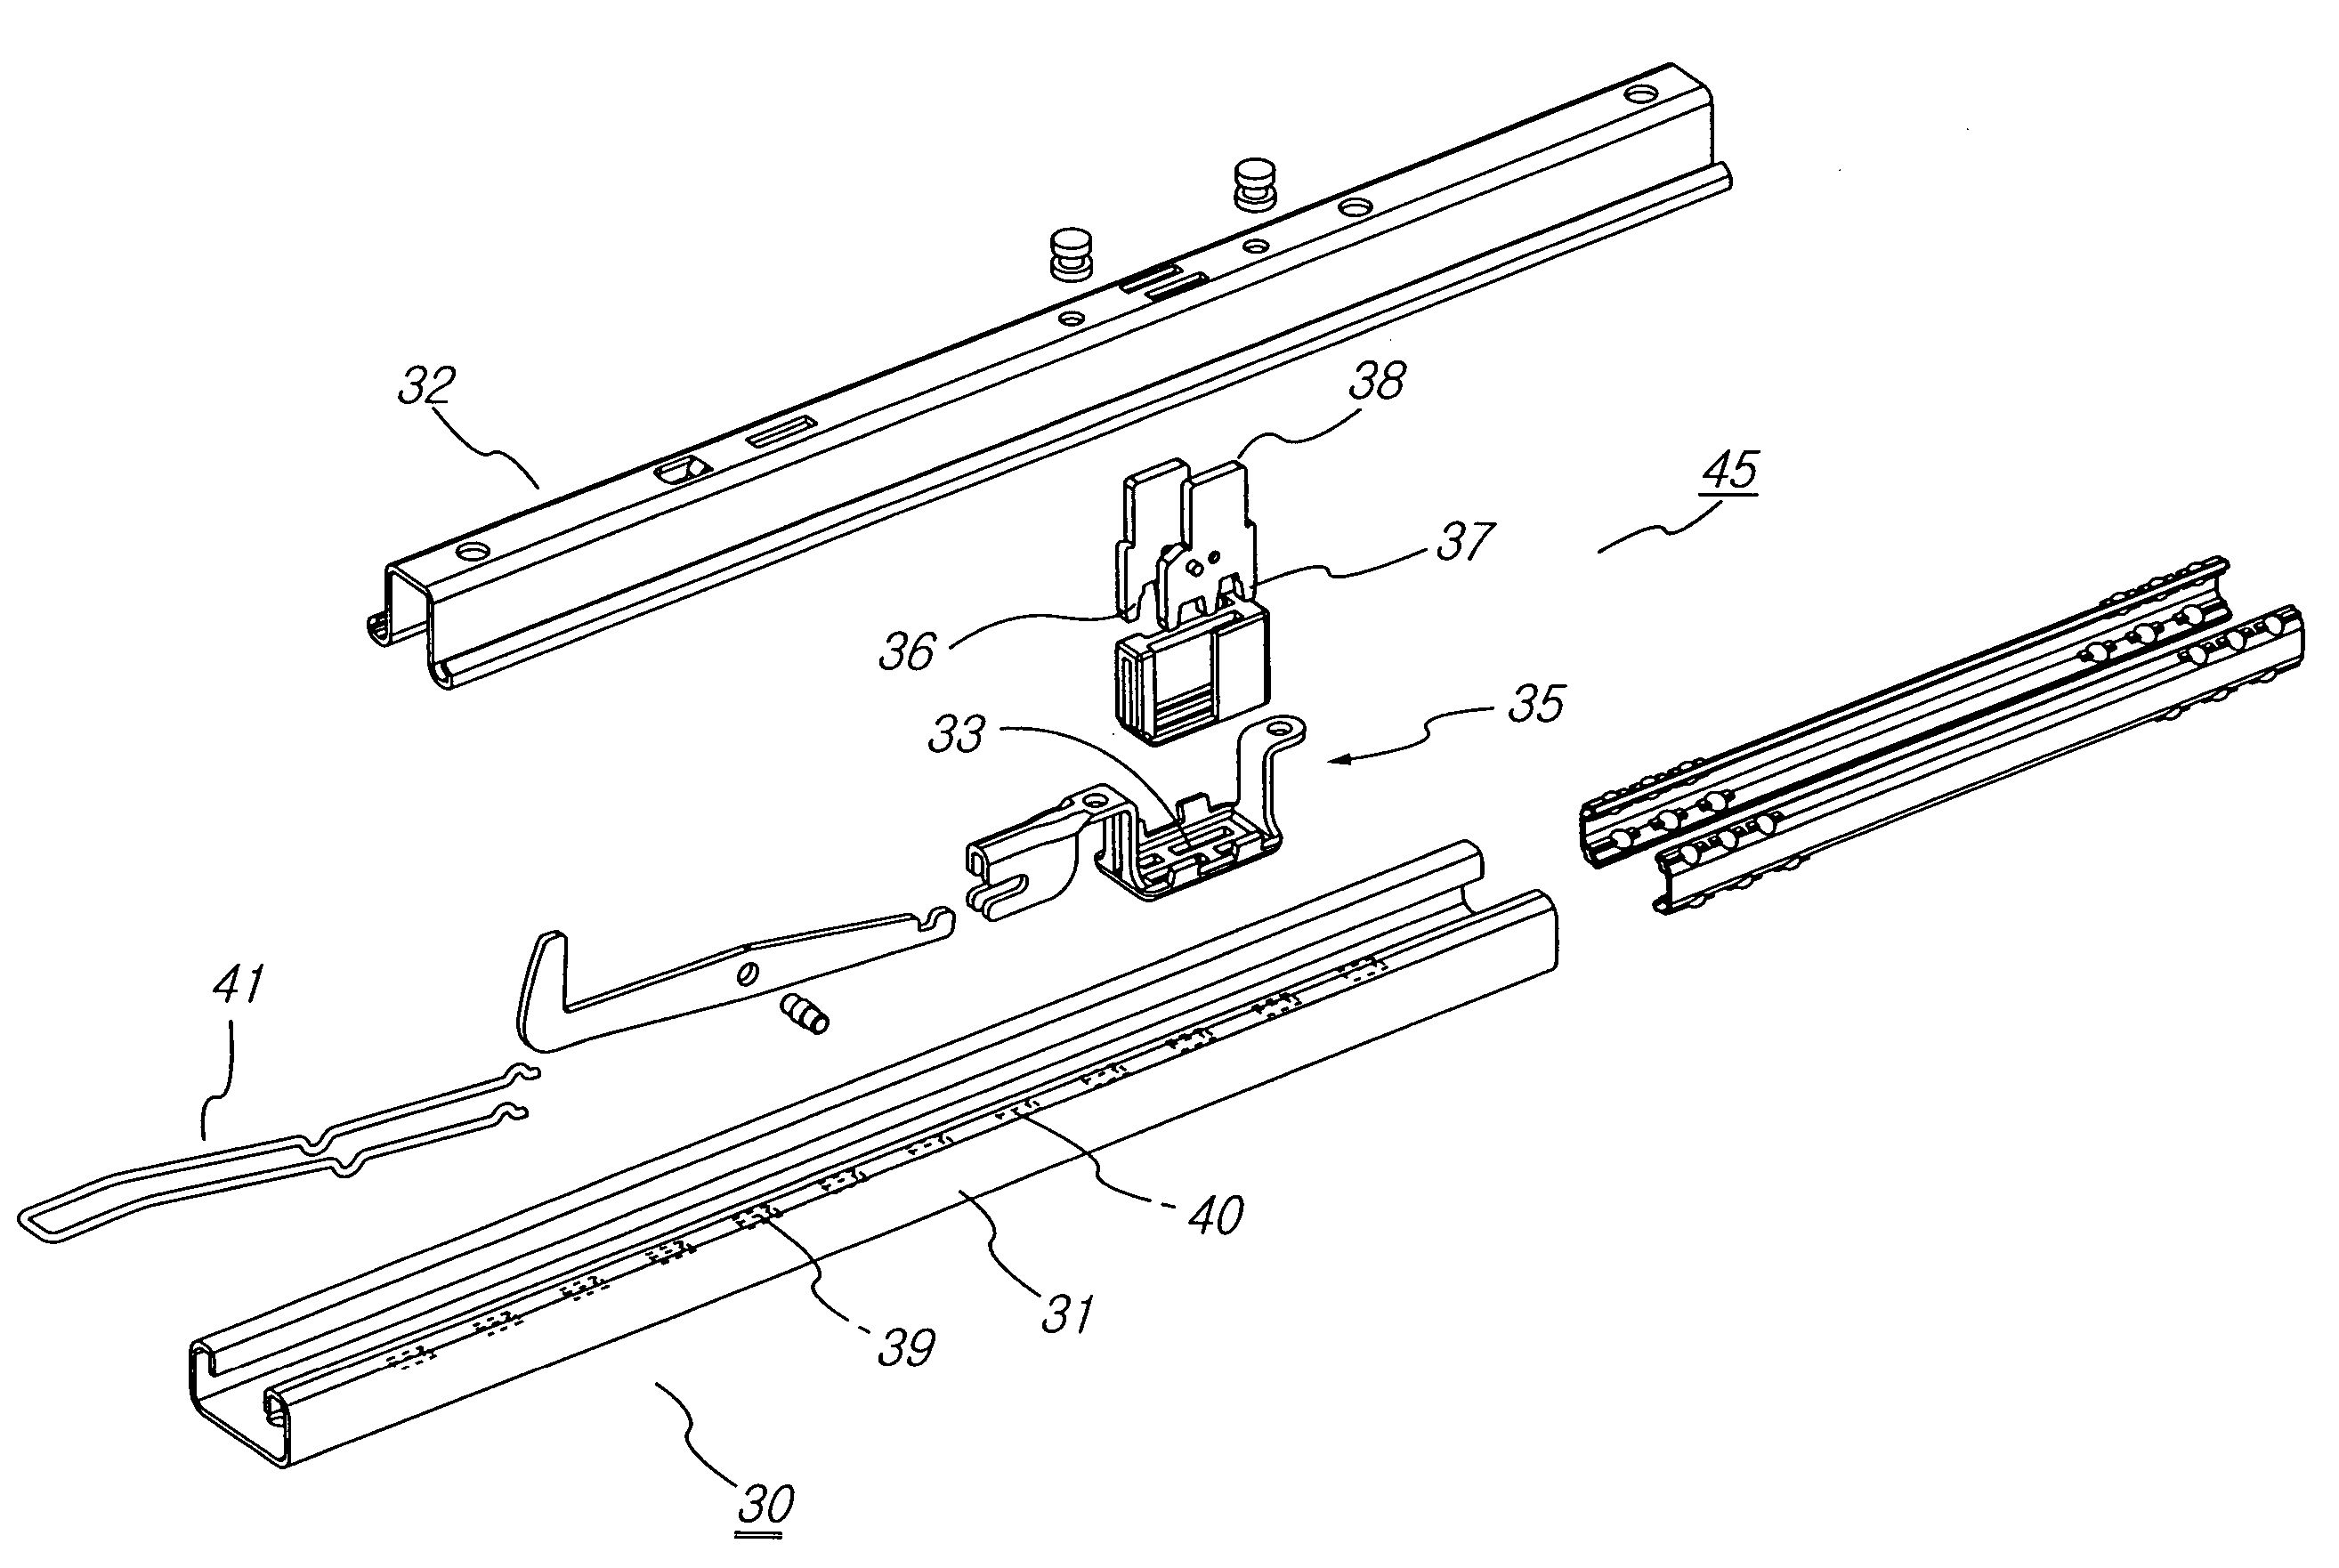 Locking guide of seat locking device for vehicle